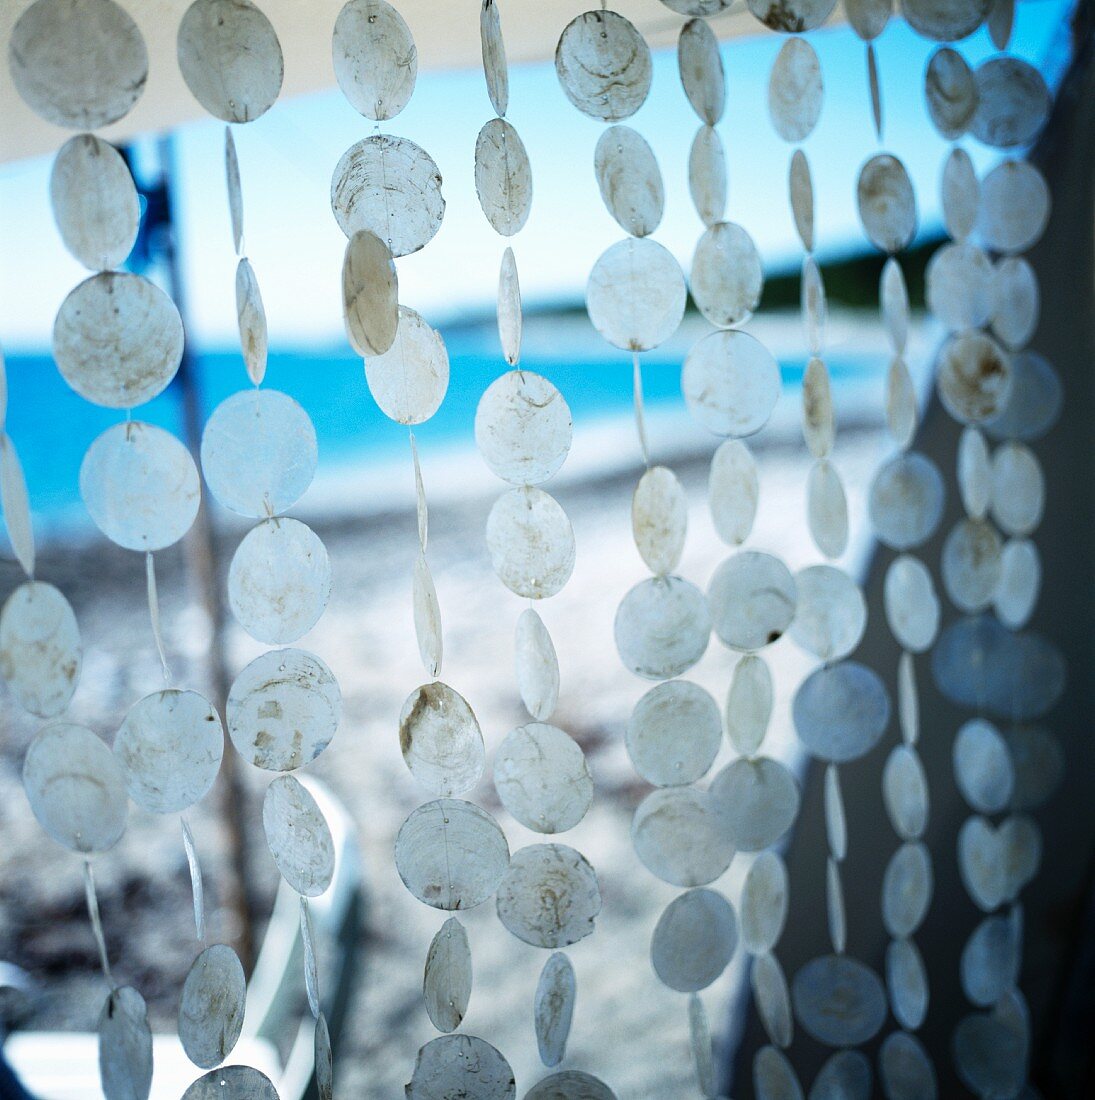 Curtain of discs hanging in a tent at the seaside